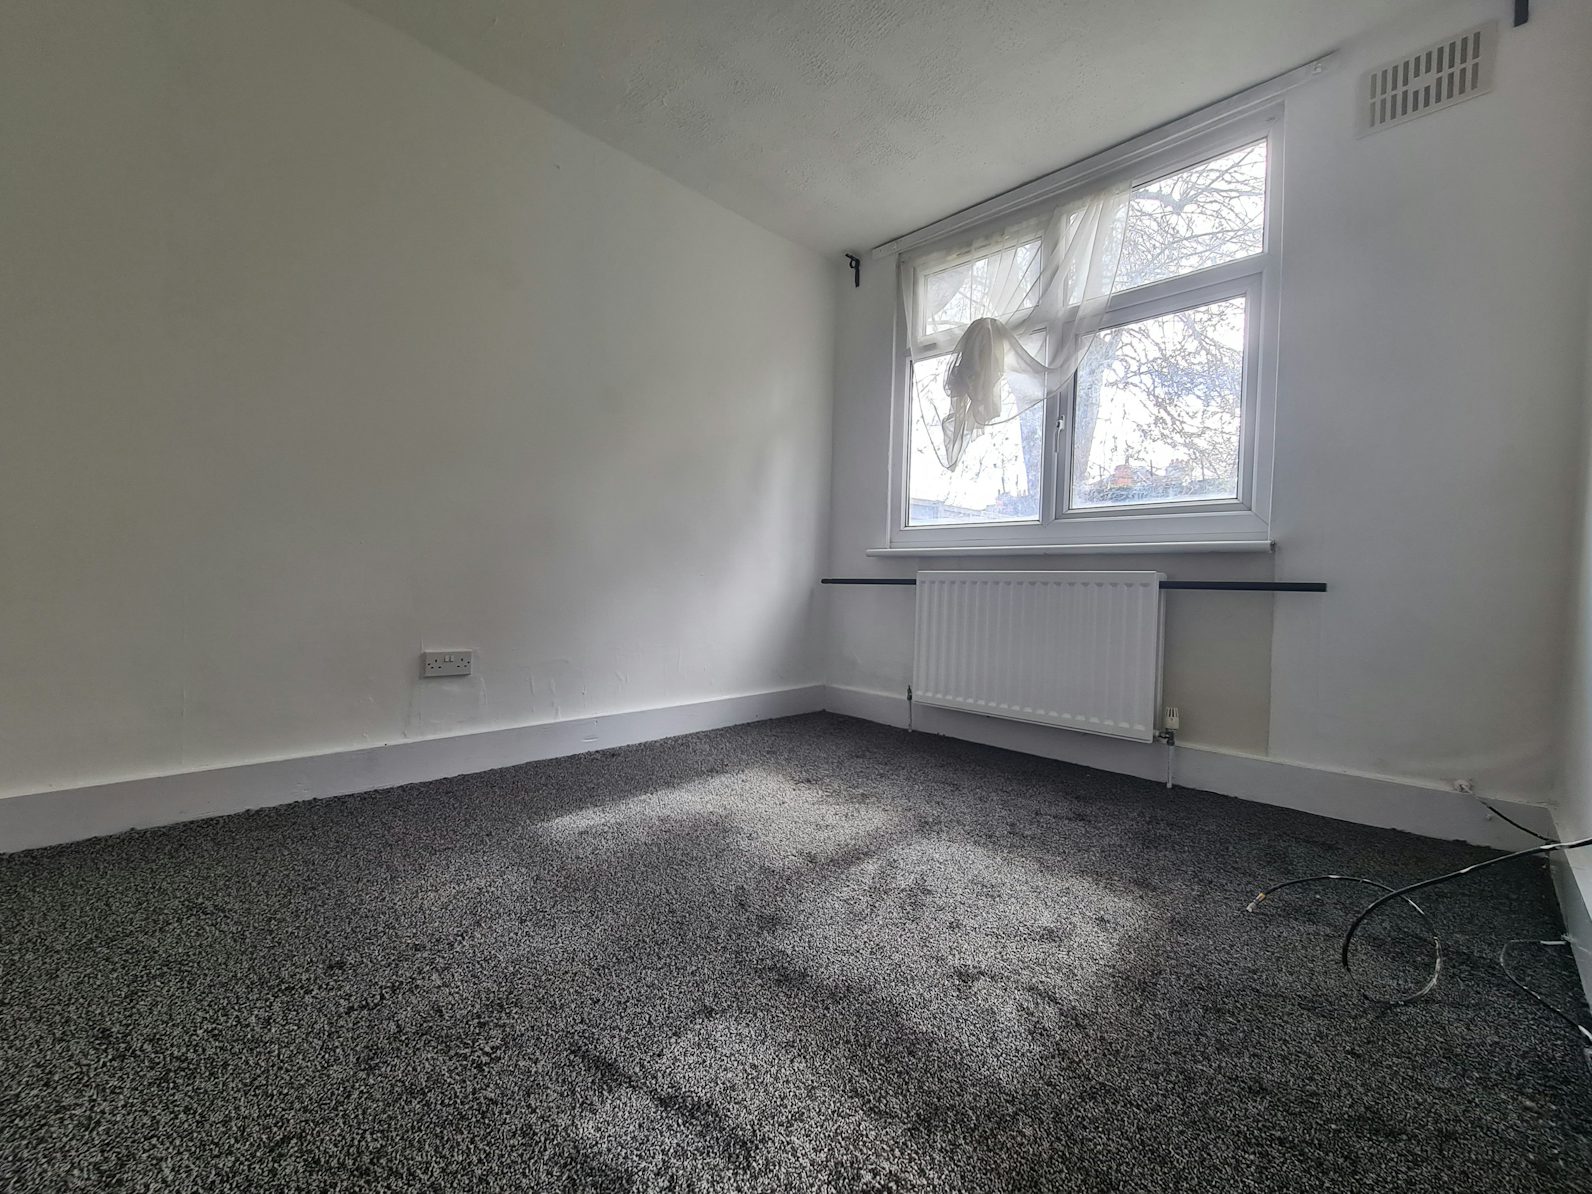 Flat to rent on Fortunegate Road London, NW10